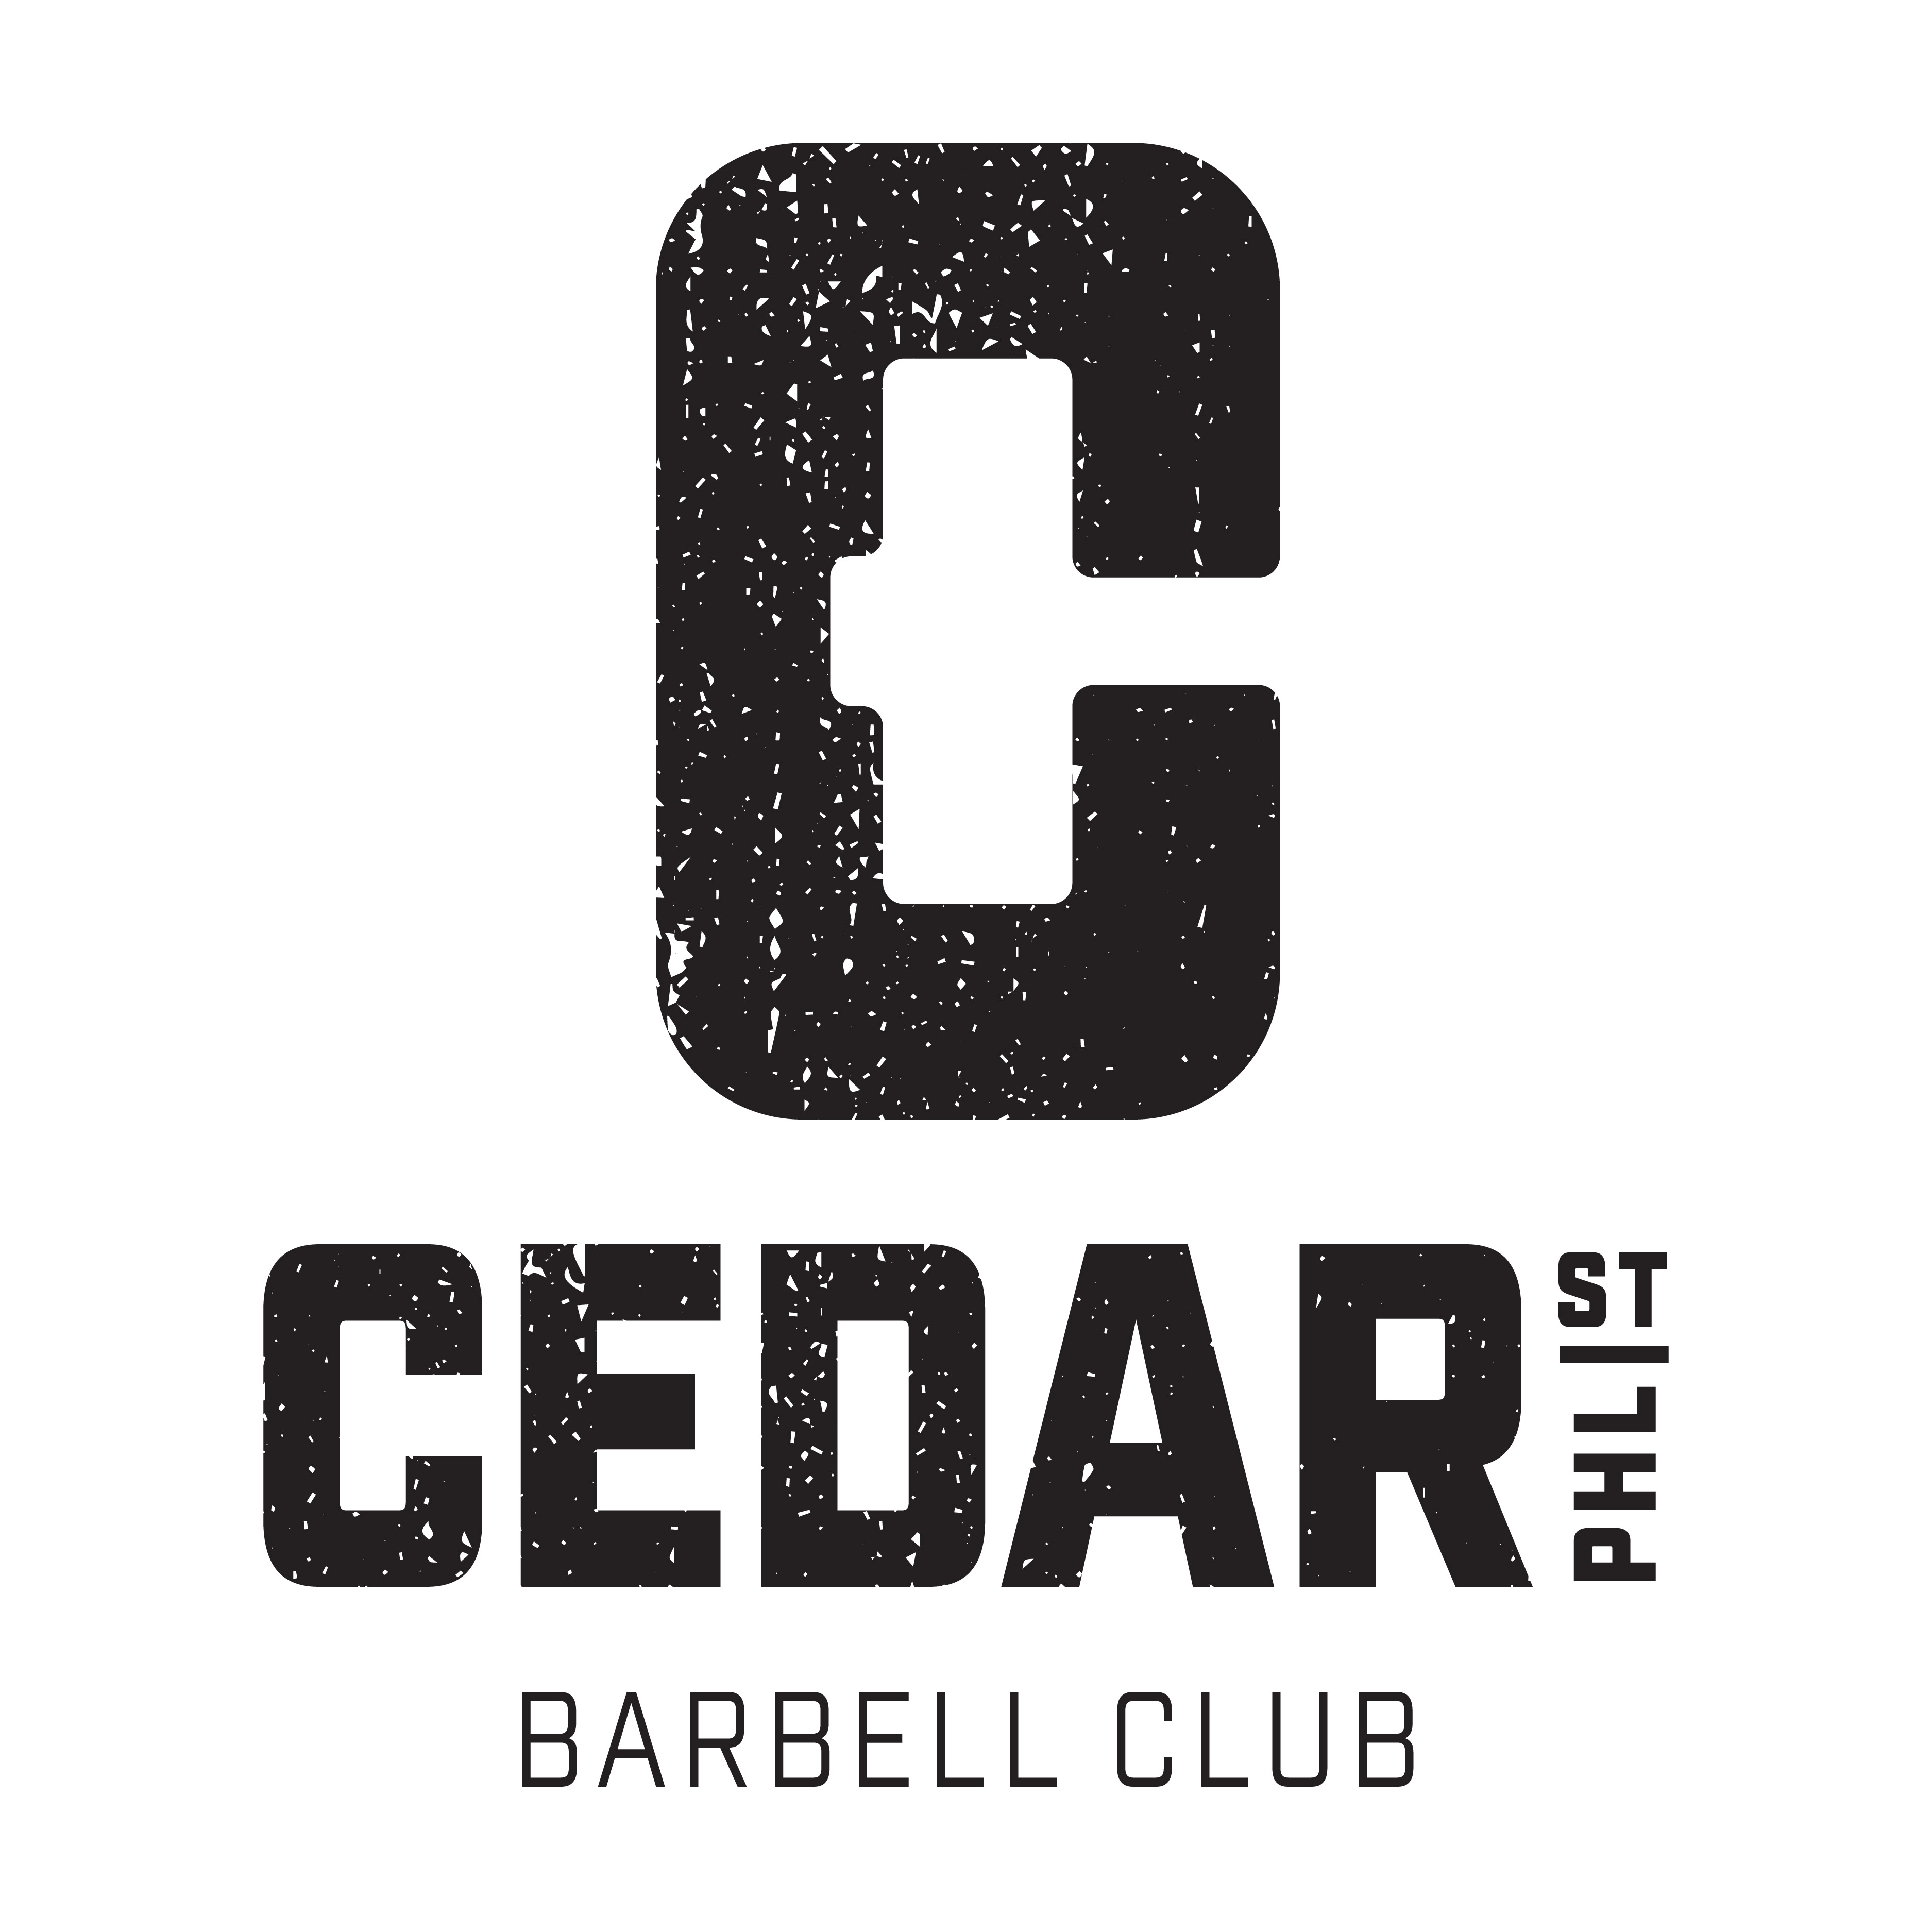 Cedar Street Barbell Club logo design by logo designer Jason Moss for your inspiration and for the worlds largest logo competition